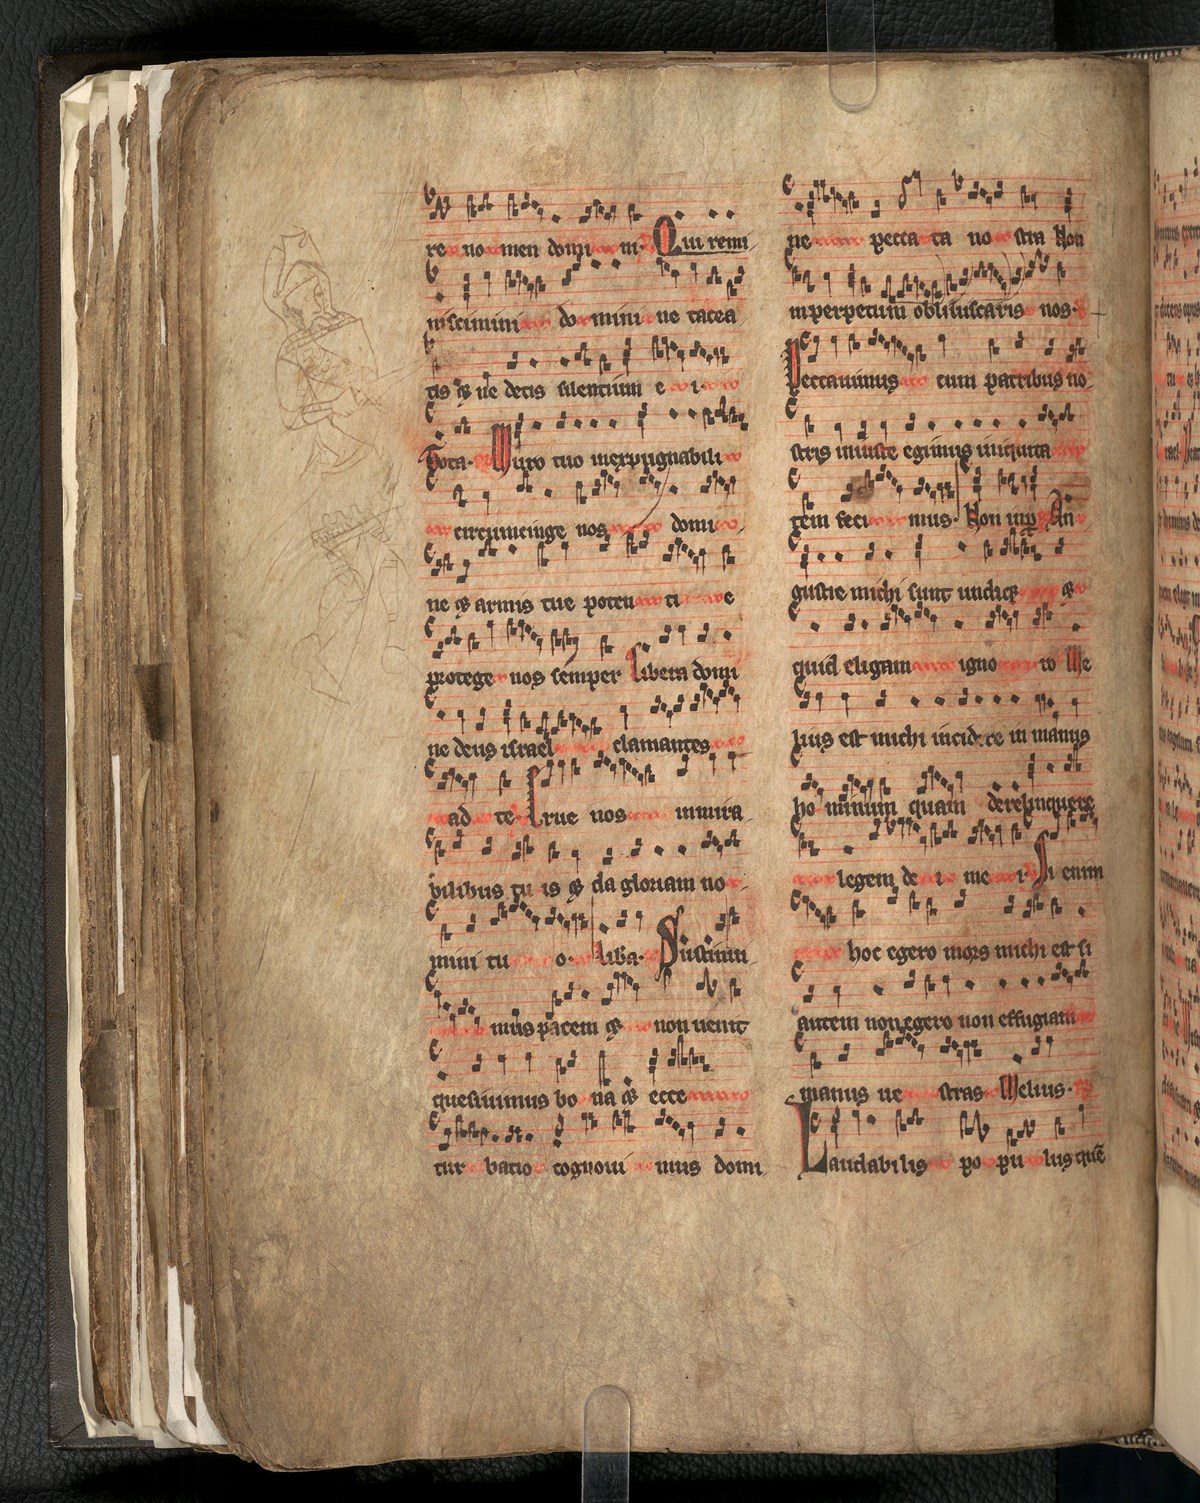 Many medieval manuscripts have drawings in the margins, which were added by others after the volume was finished. The Herdmanstoun Breviary, used in Scotland and written ca. 1300, has drawings and doodles of great historical interest.  They are rich in period detail and can be dated to 14th-century 